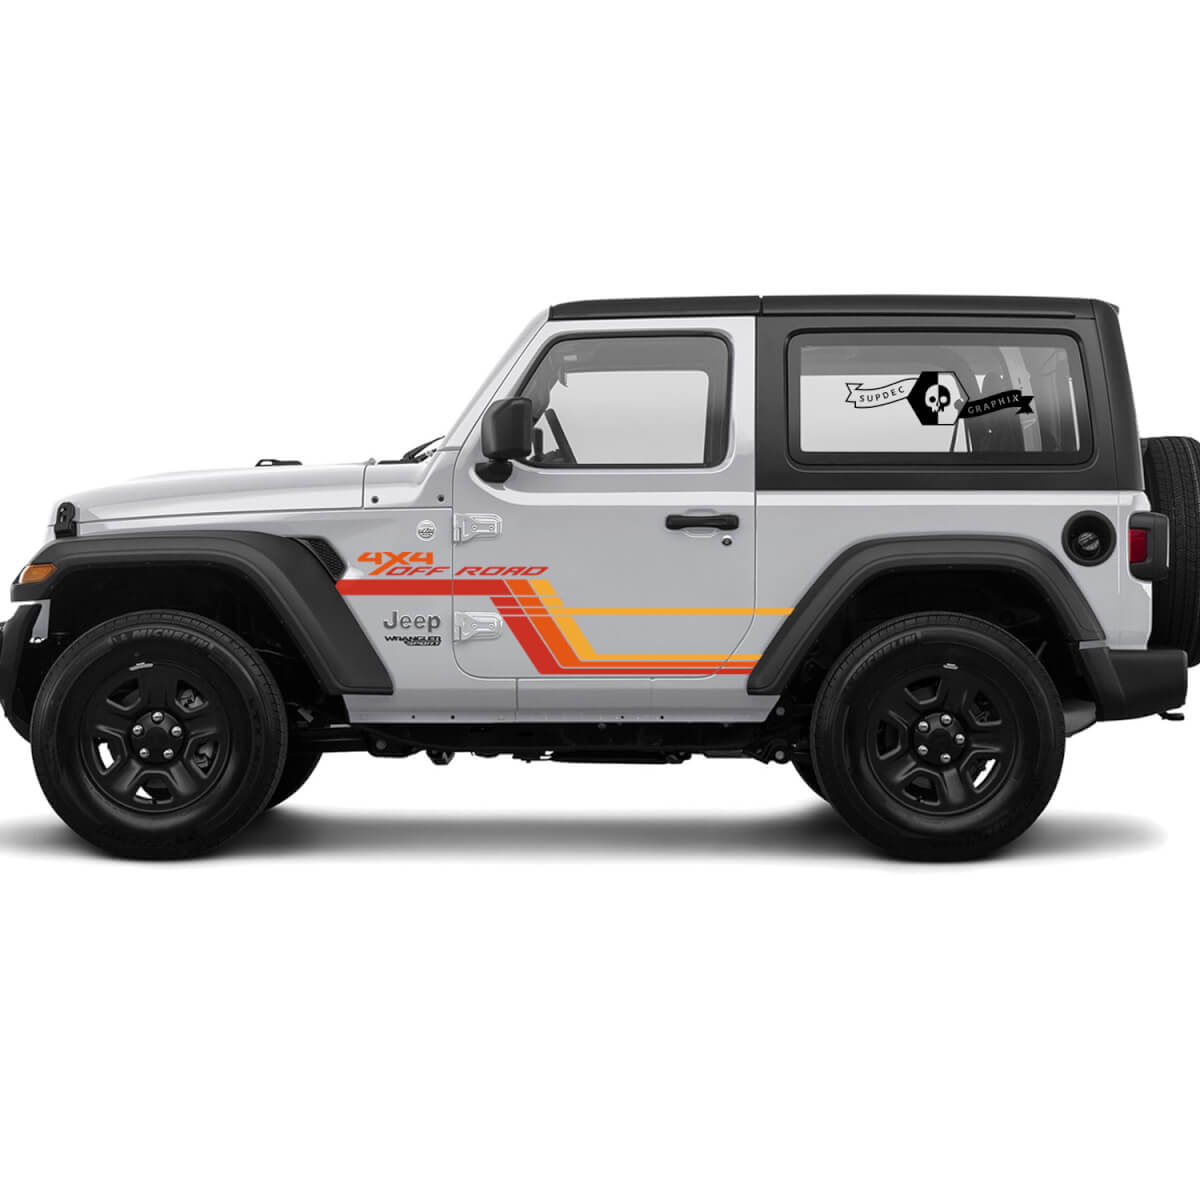 Jeep Rubicon Retro Vintage 4x4 Offroad 2 Doors Racing Stripe Kit Sport Off Road Graphic Kits